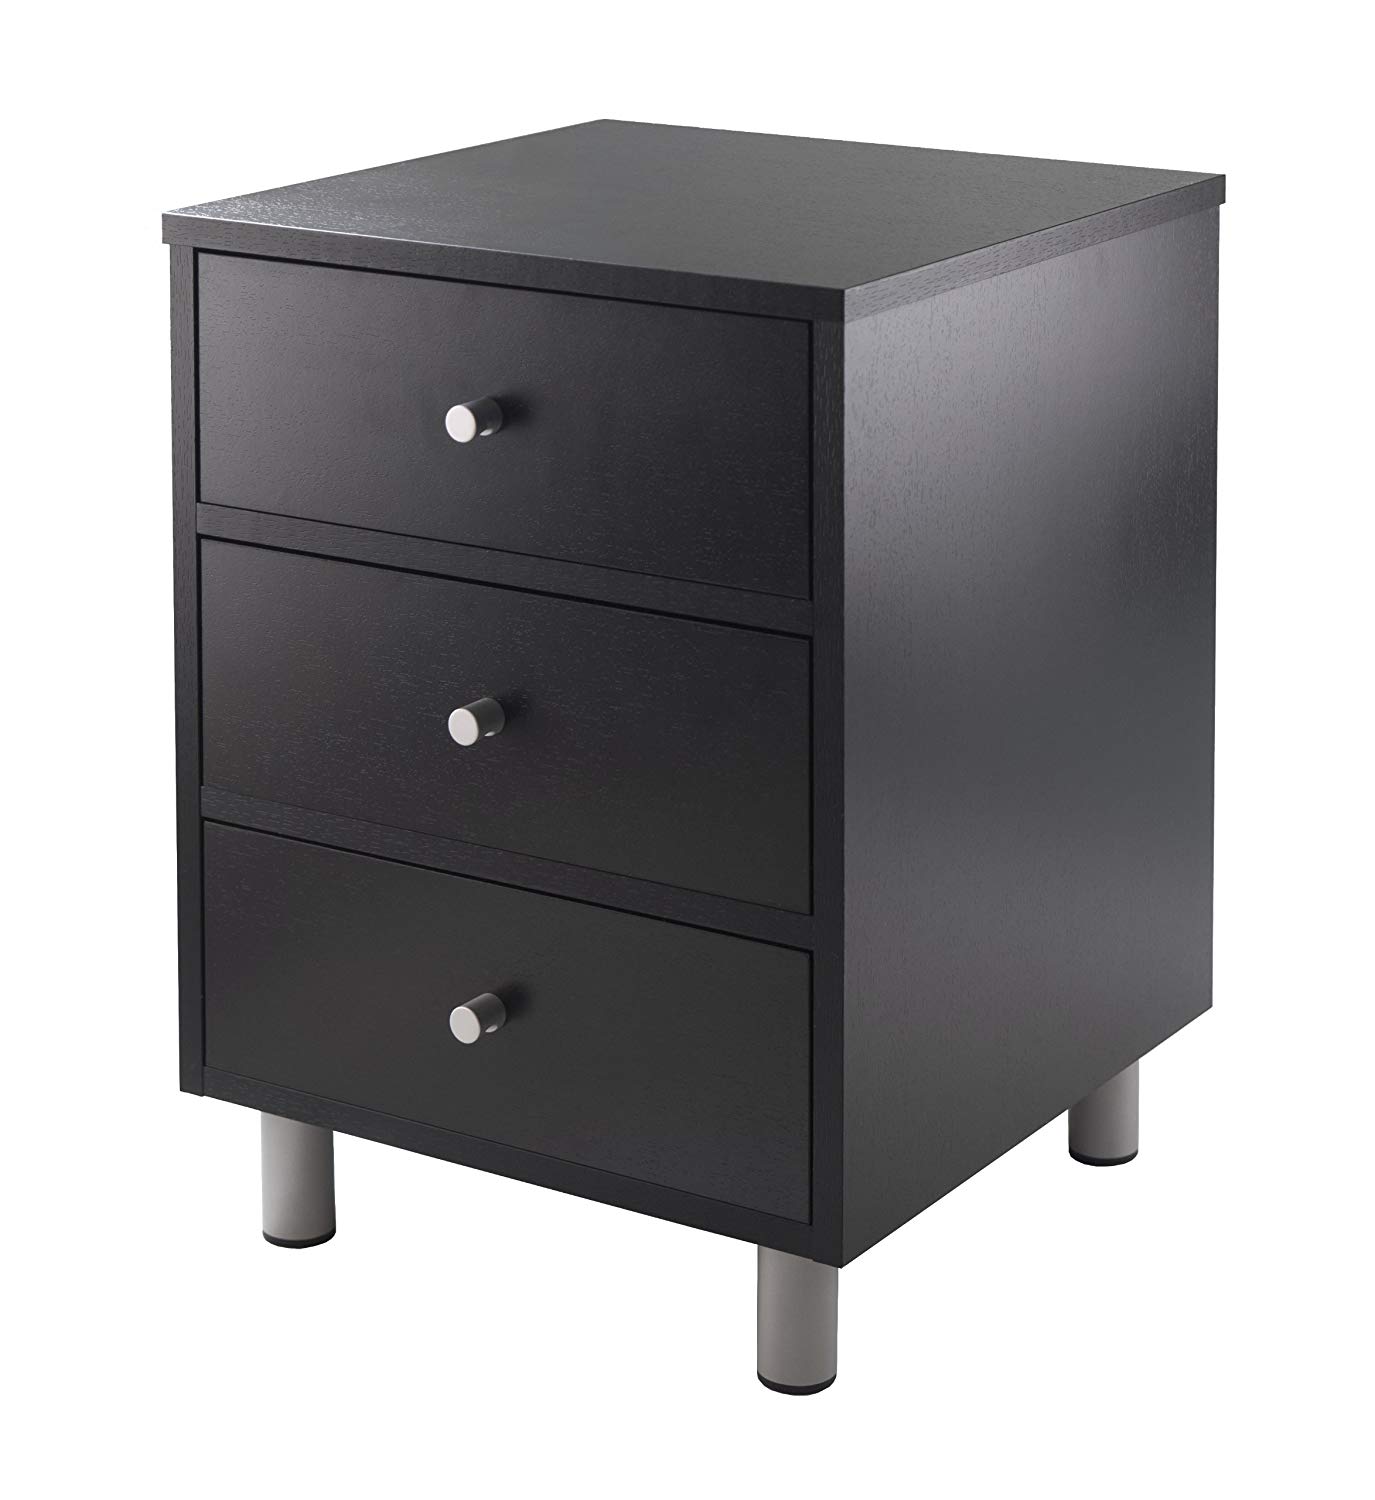 accent tables for bedroom magzboomers modern winsome daniel table with drawer black finish tempo furniture meaning mirrored dresser target leaf french console small corner end